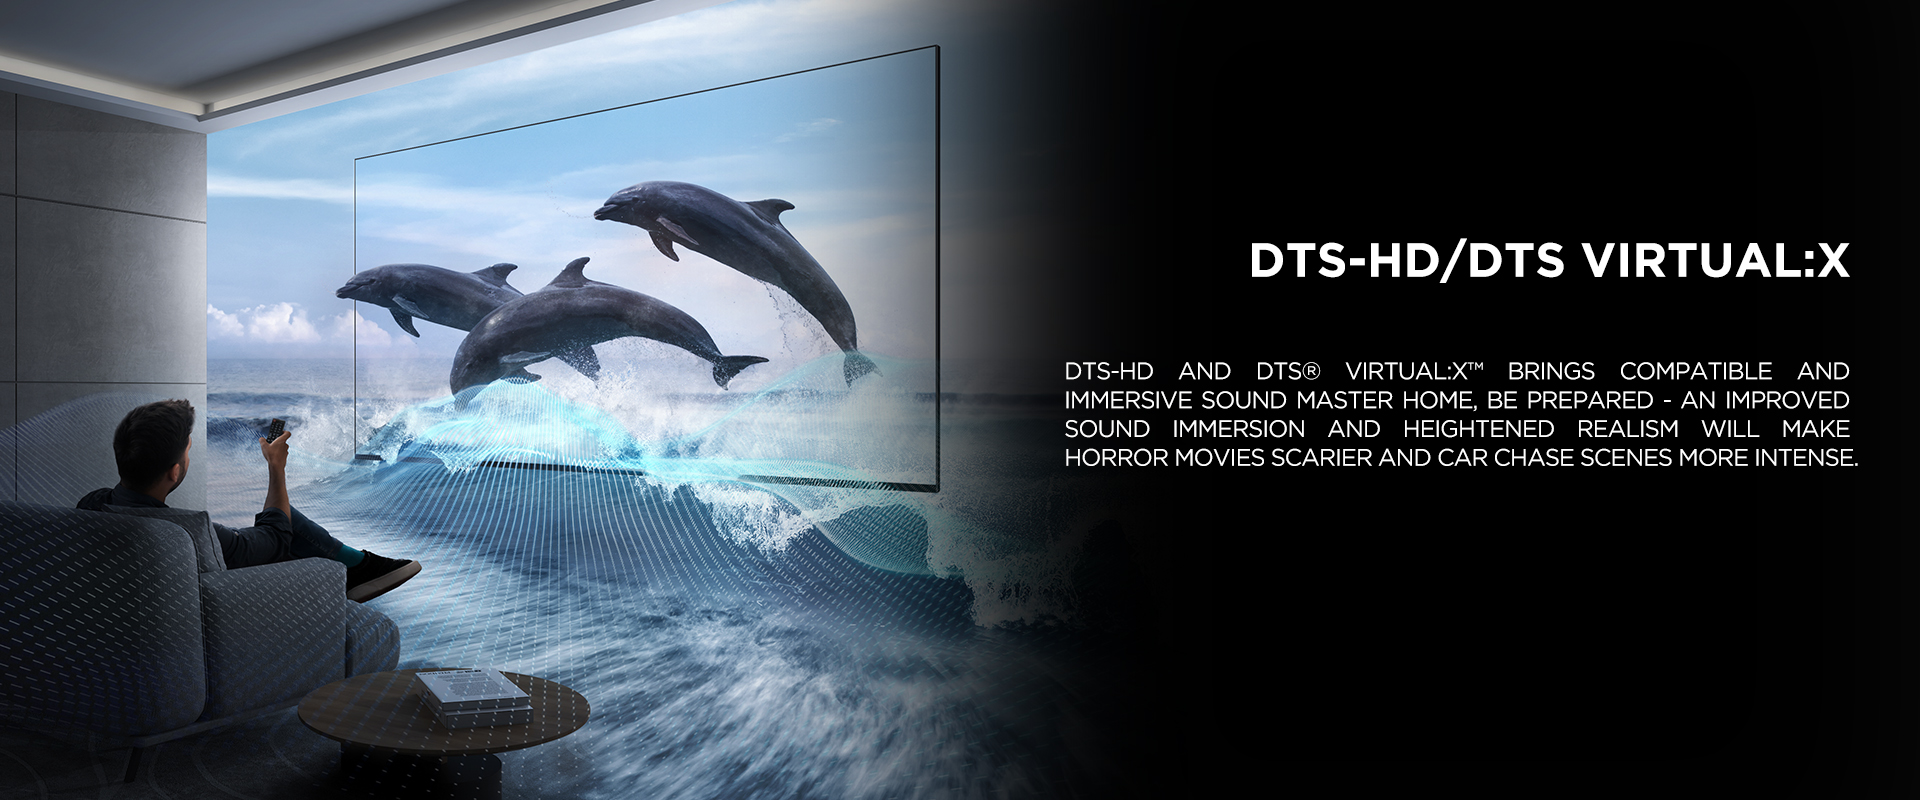 DTS-HD/DTS Virtual:X - DTS-HD and DTS?? VIRTUAL:XŸ?? brings compatible and immersive sound master home, be prepared - an improved sound immersion and heightened realism will make horror movies scarier and car chase scenes more intense.